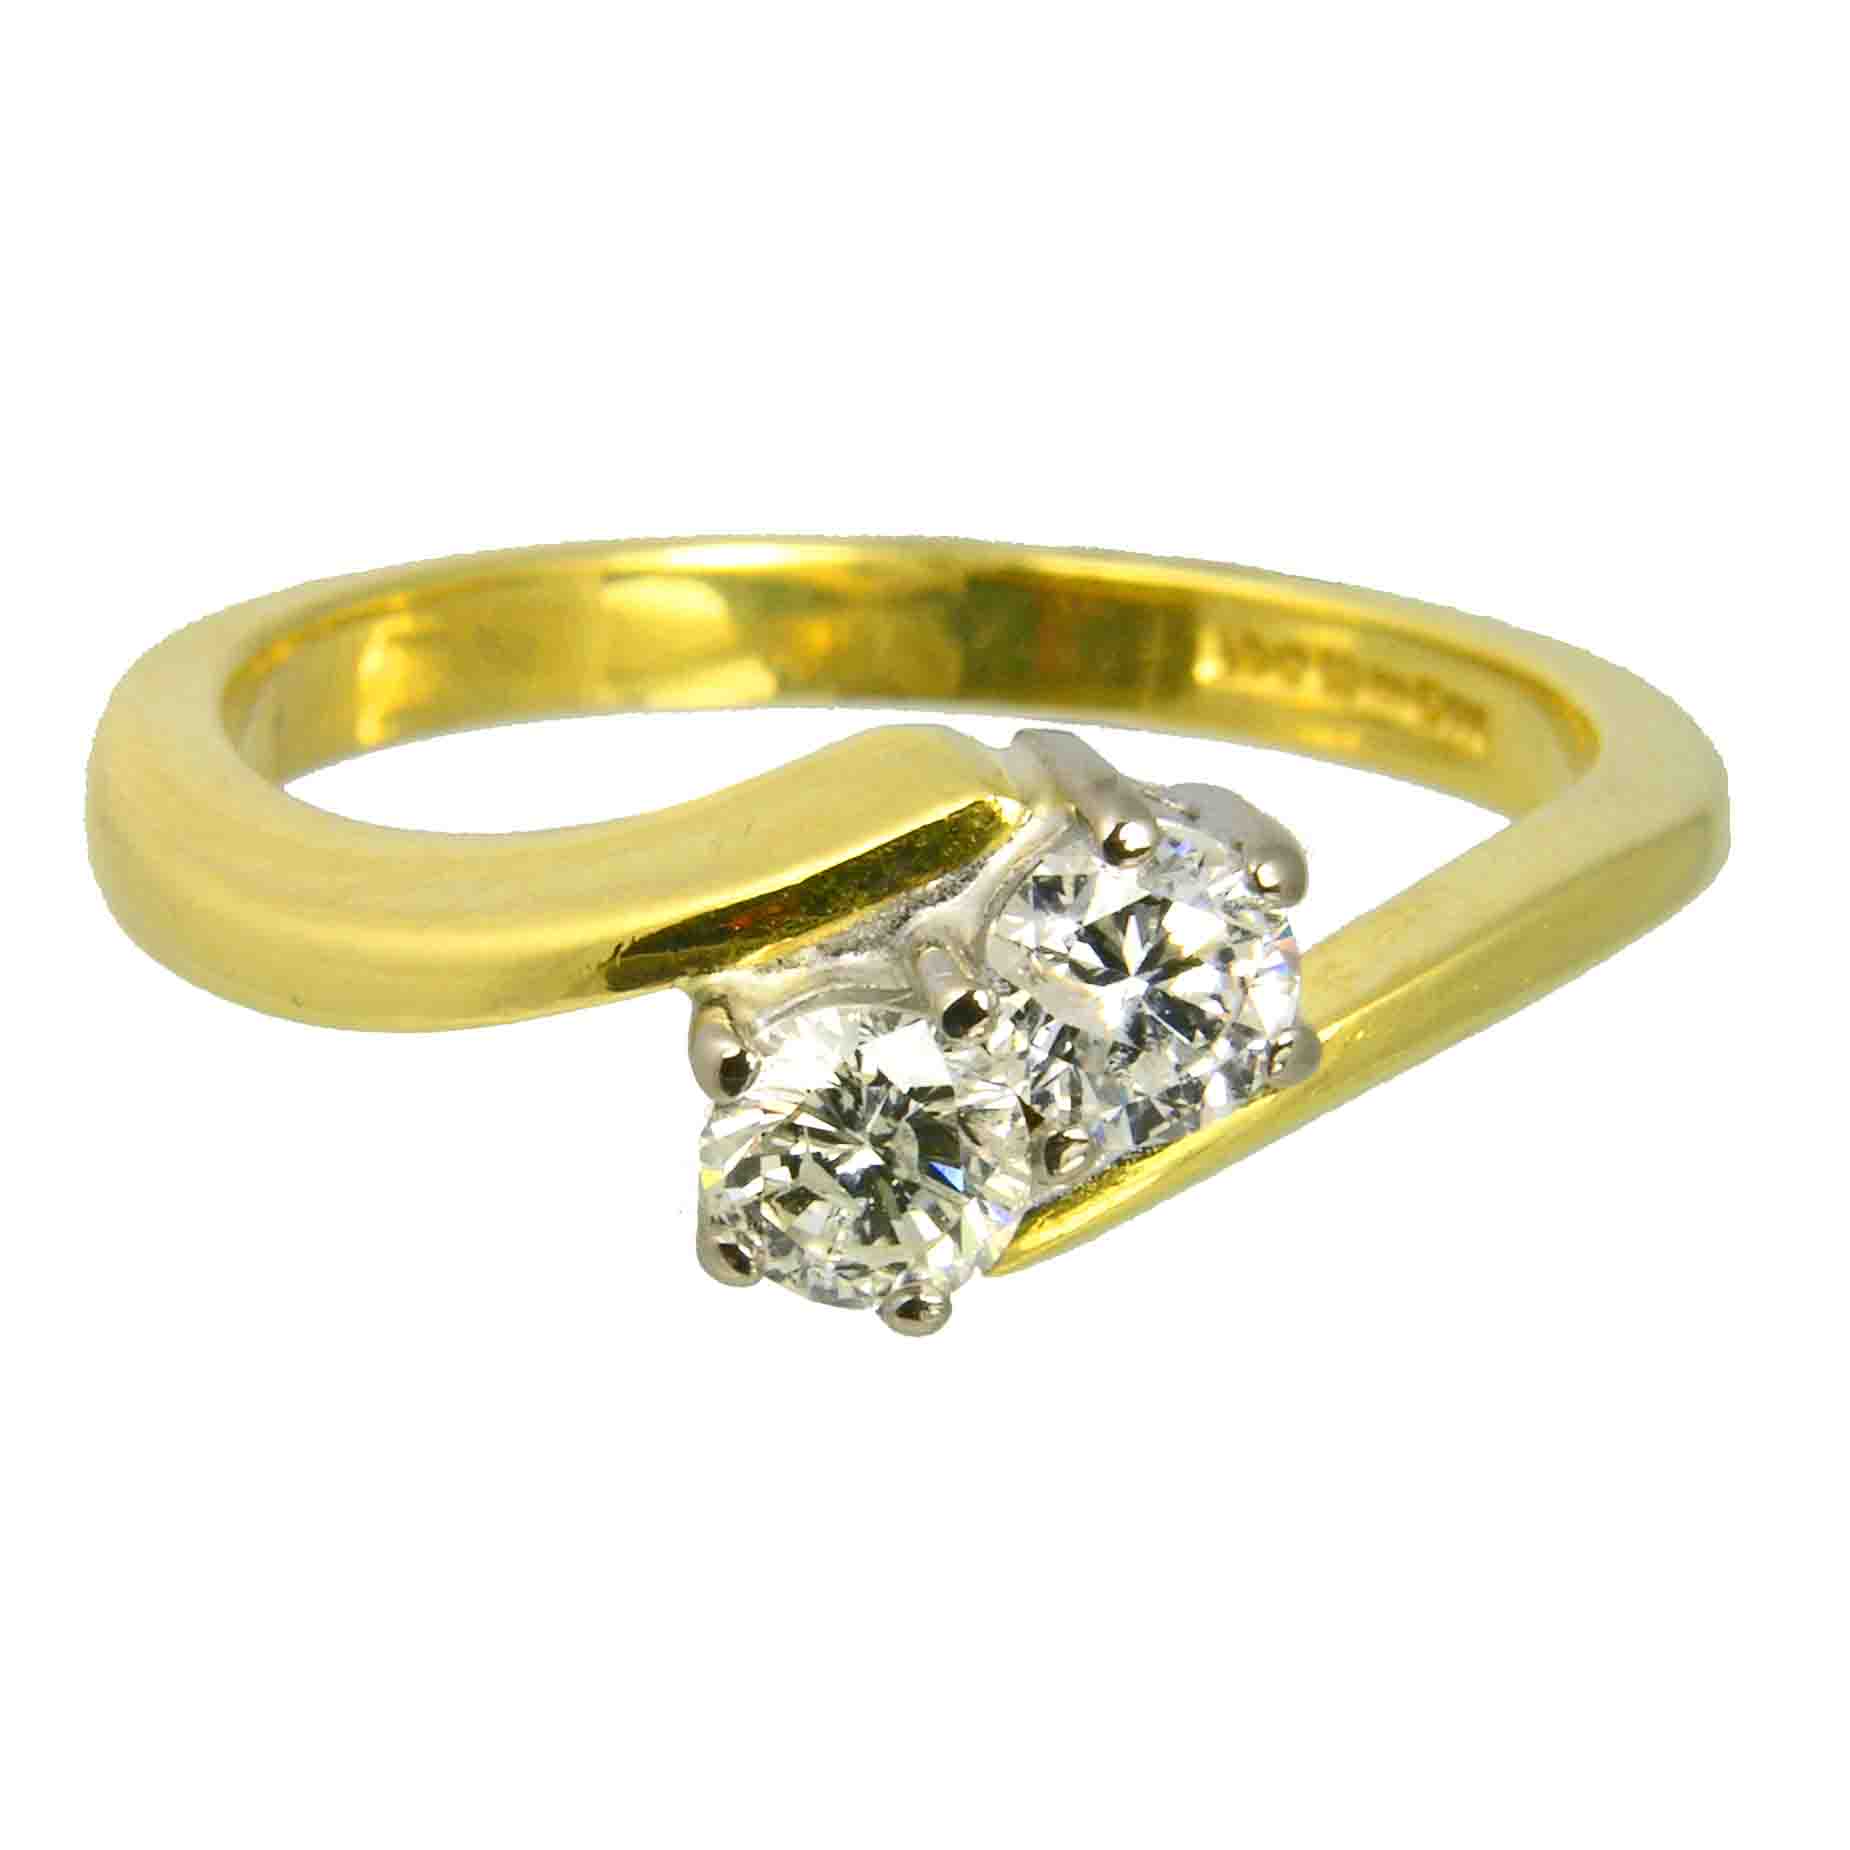 second hand Pre loved 18ct yellow gold 2 stone diamond toi et moi ring from AA Thornton Kettering Northampton